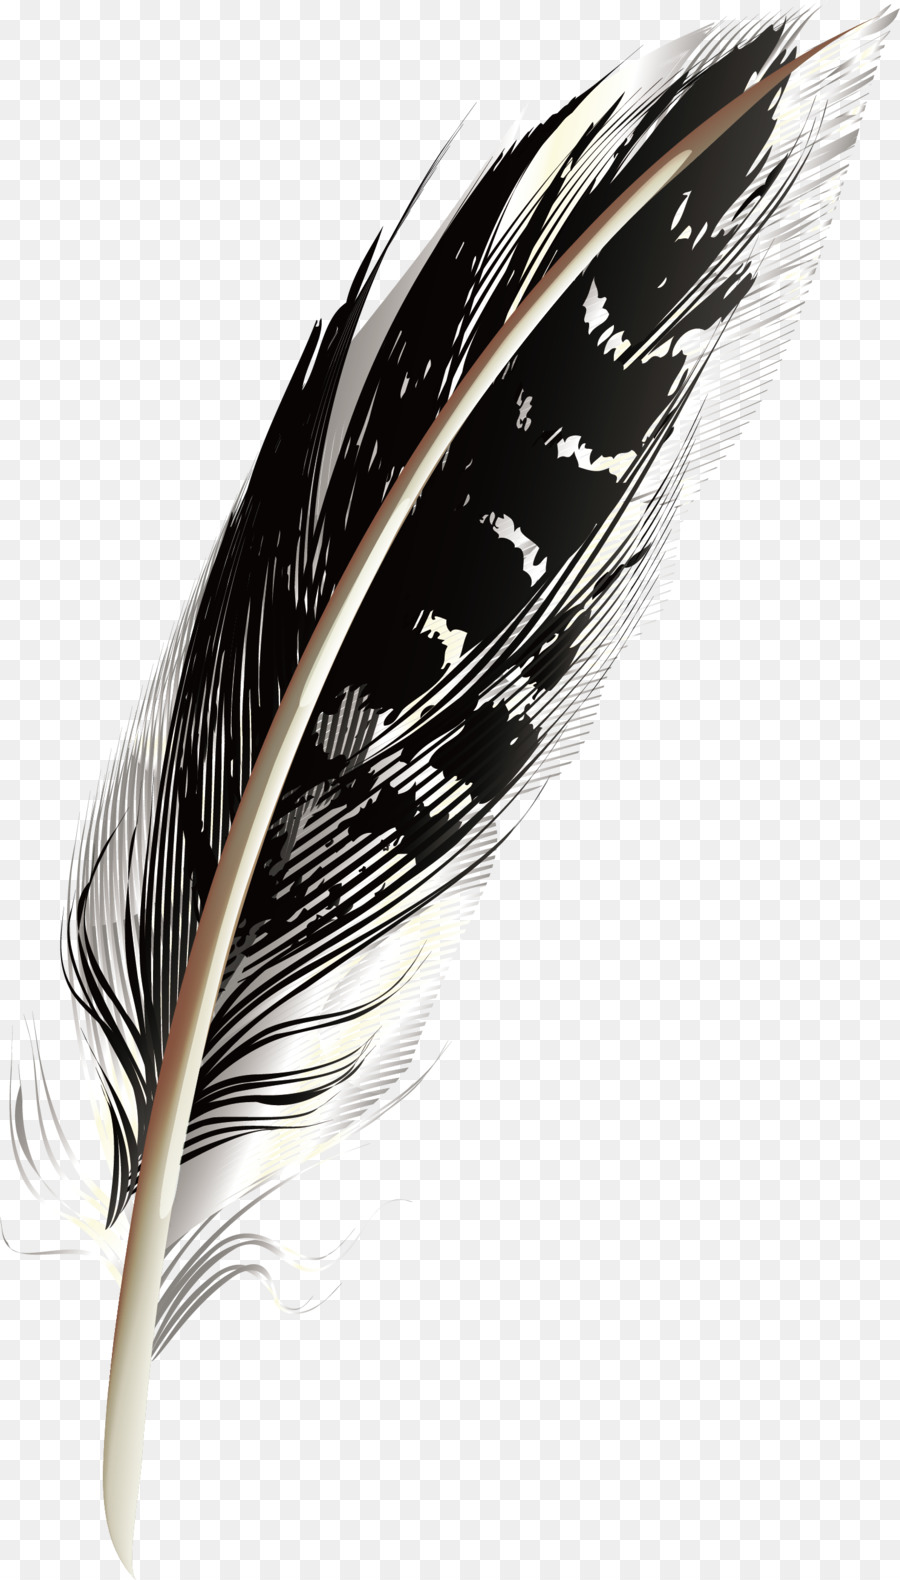 Feather - A black pattern feathers png download - 1488*2612 - Free Transparent Feather png Download.